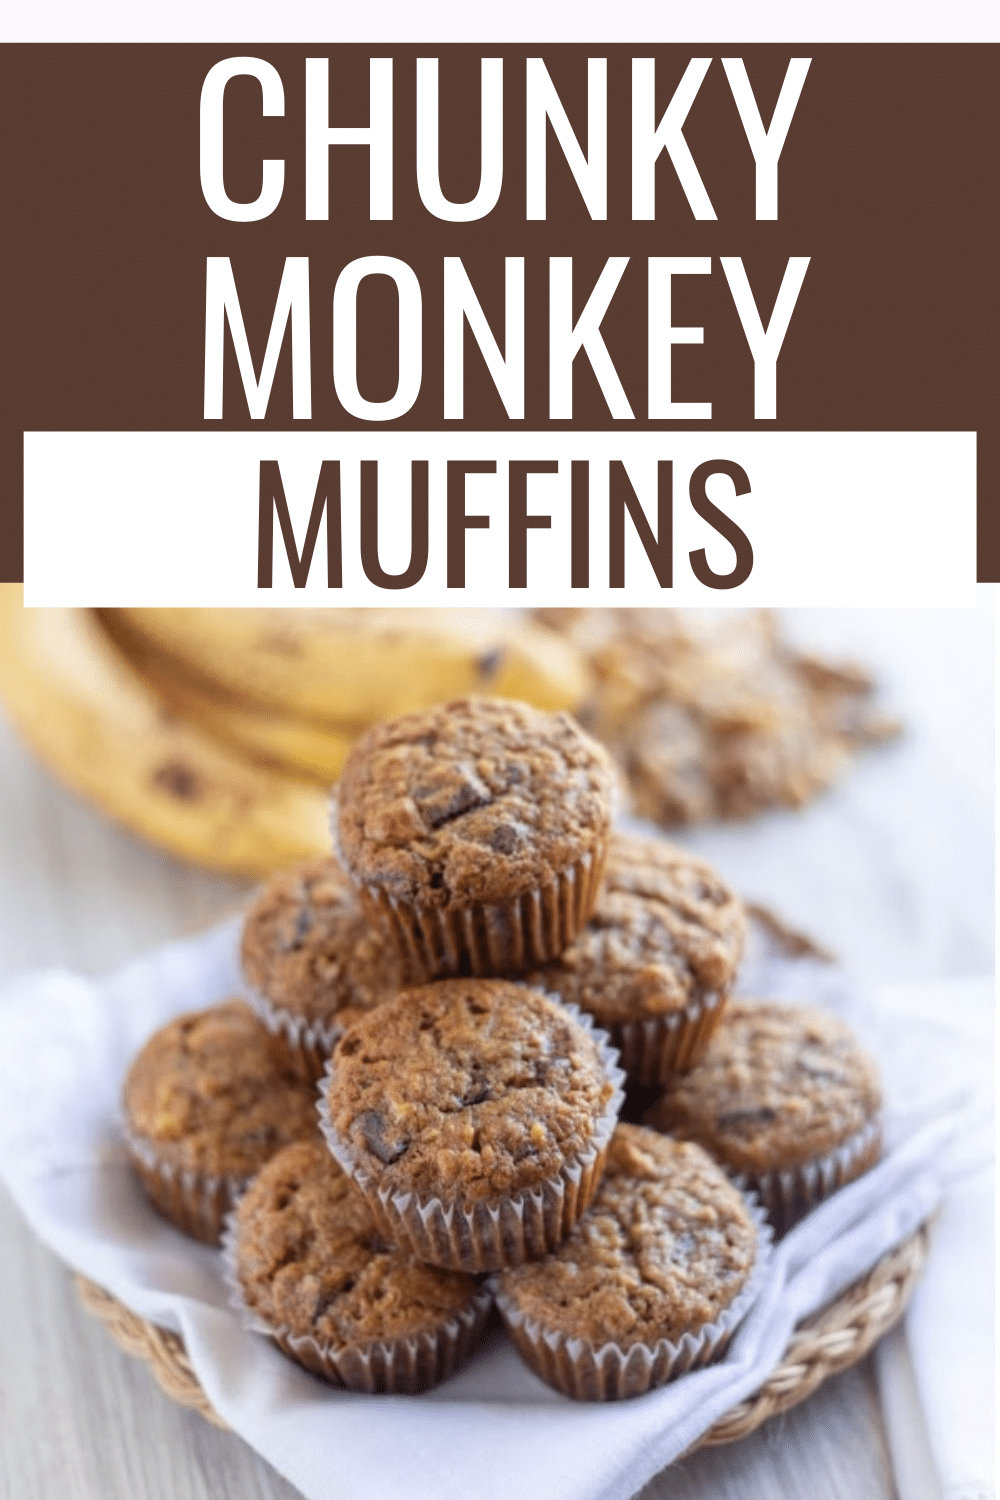 Chunky Monkey Muffins are packed full of bananas, walnuts and chocolate chunks. These are perfect for breakfast, dessert or a snack. #muffins #chunkymonkey #breakfast via @wondermomwannab